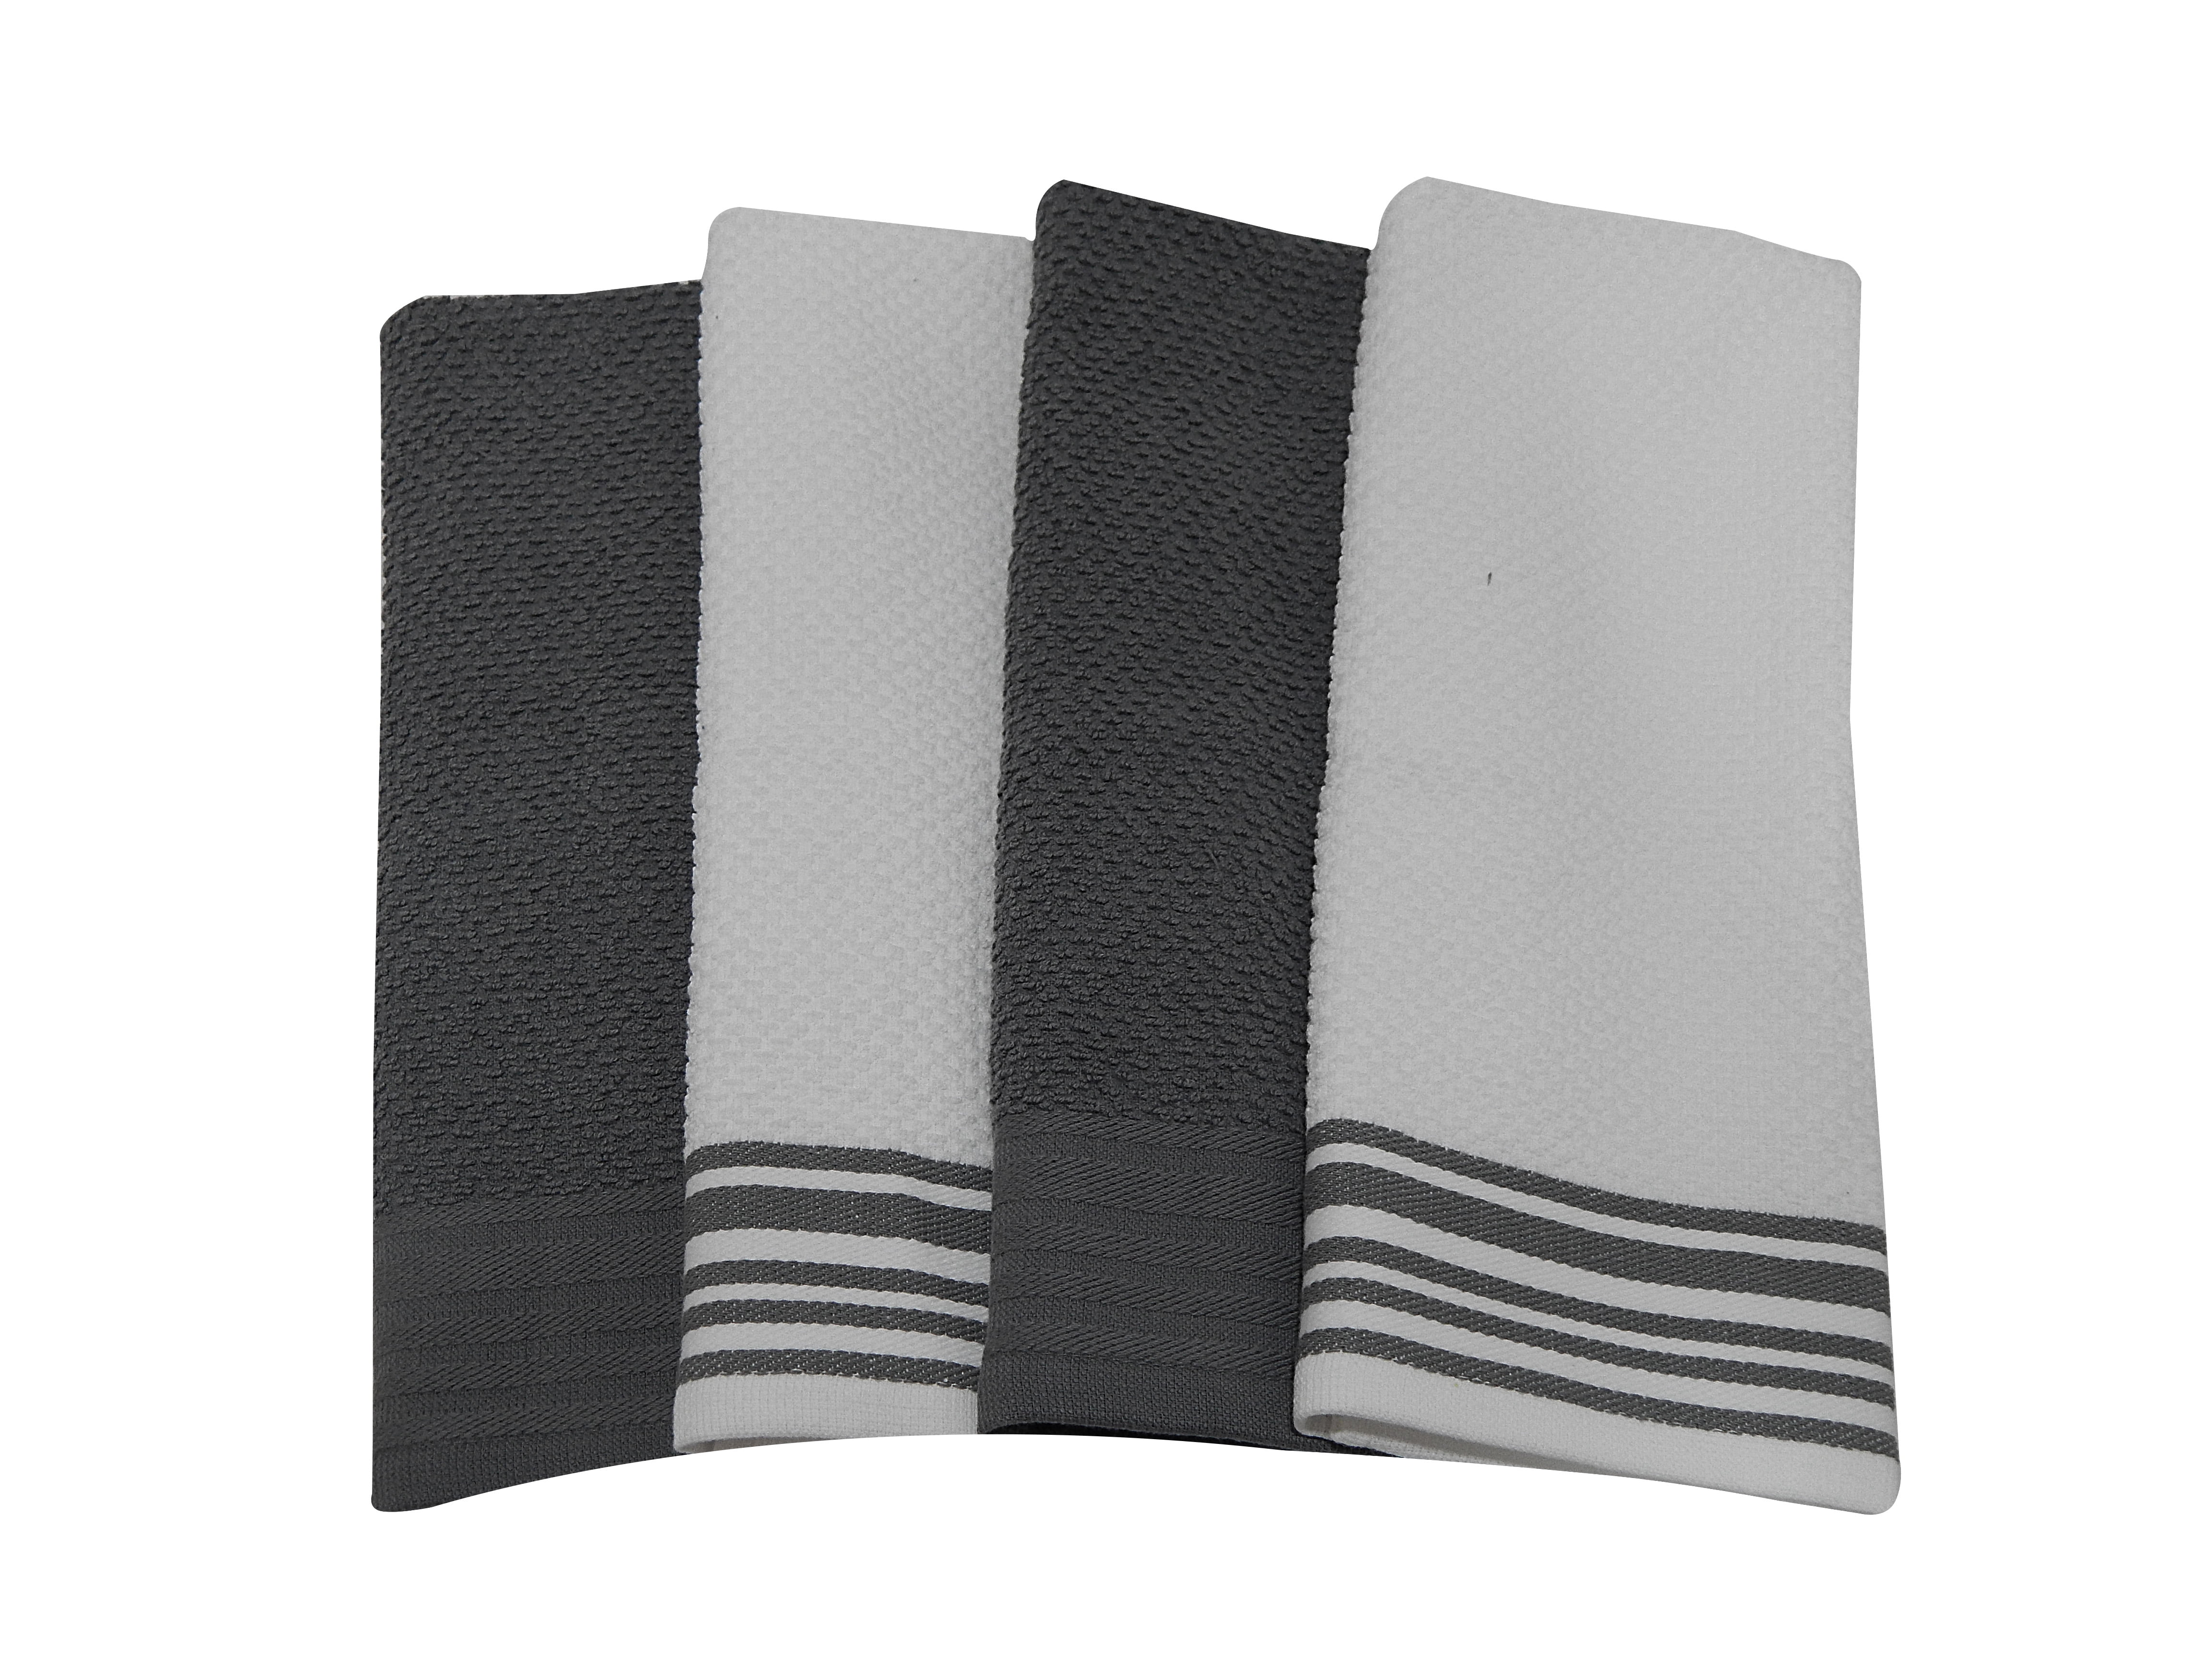 Great Gatherings Black Kitchen Towels, 5-Pack